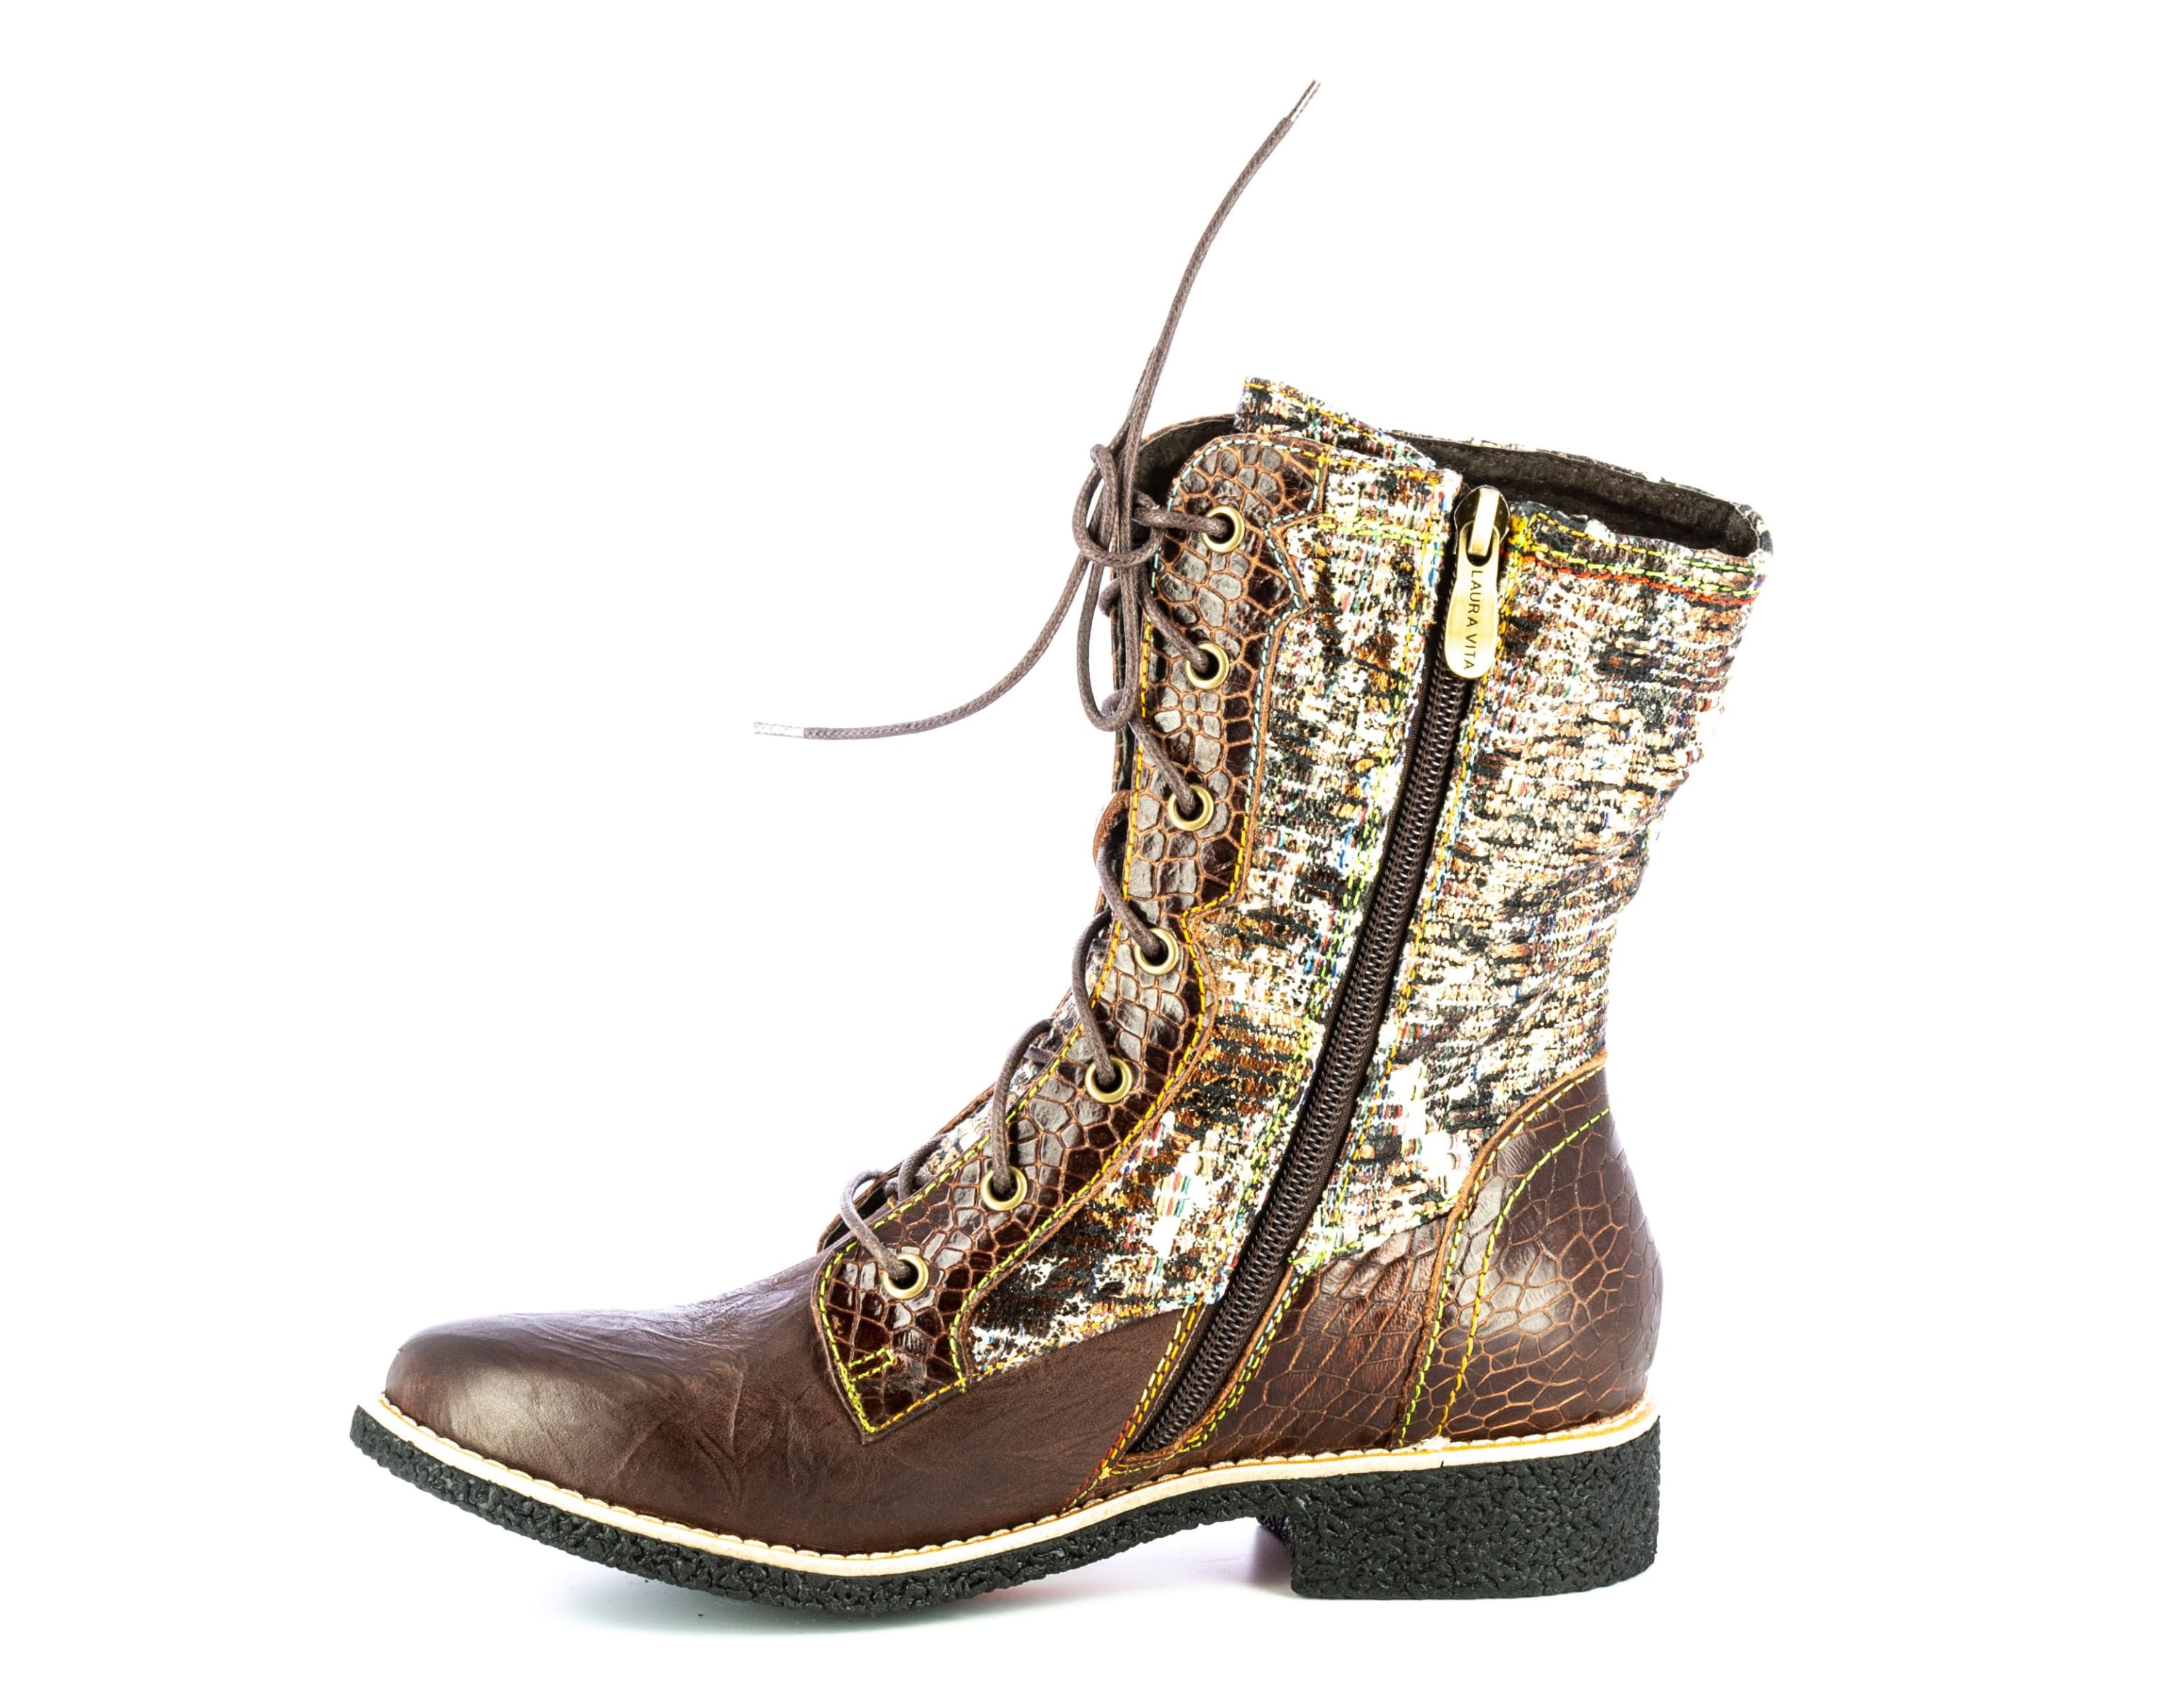 Schuh COCRALIEO 521 - Boots